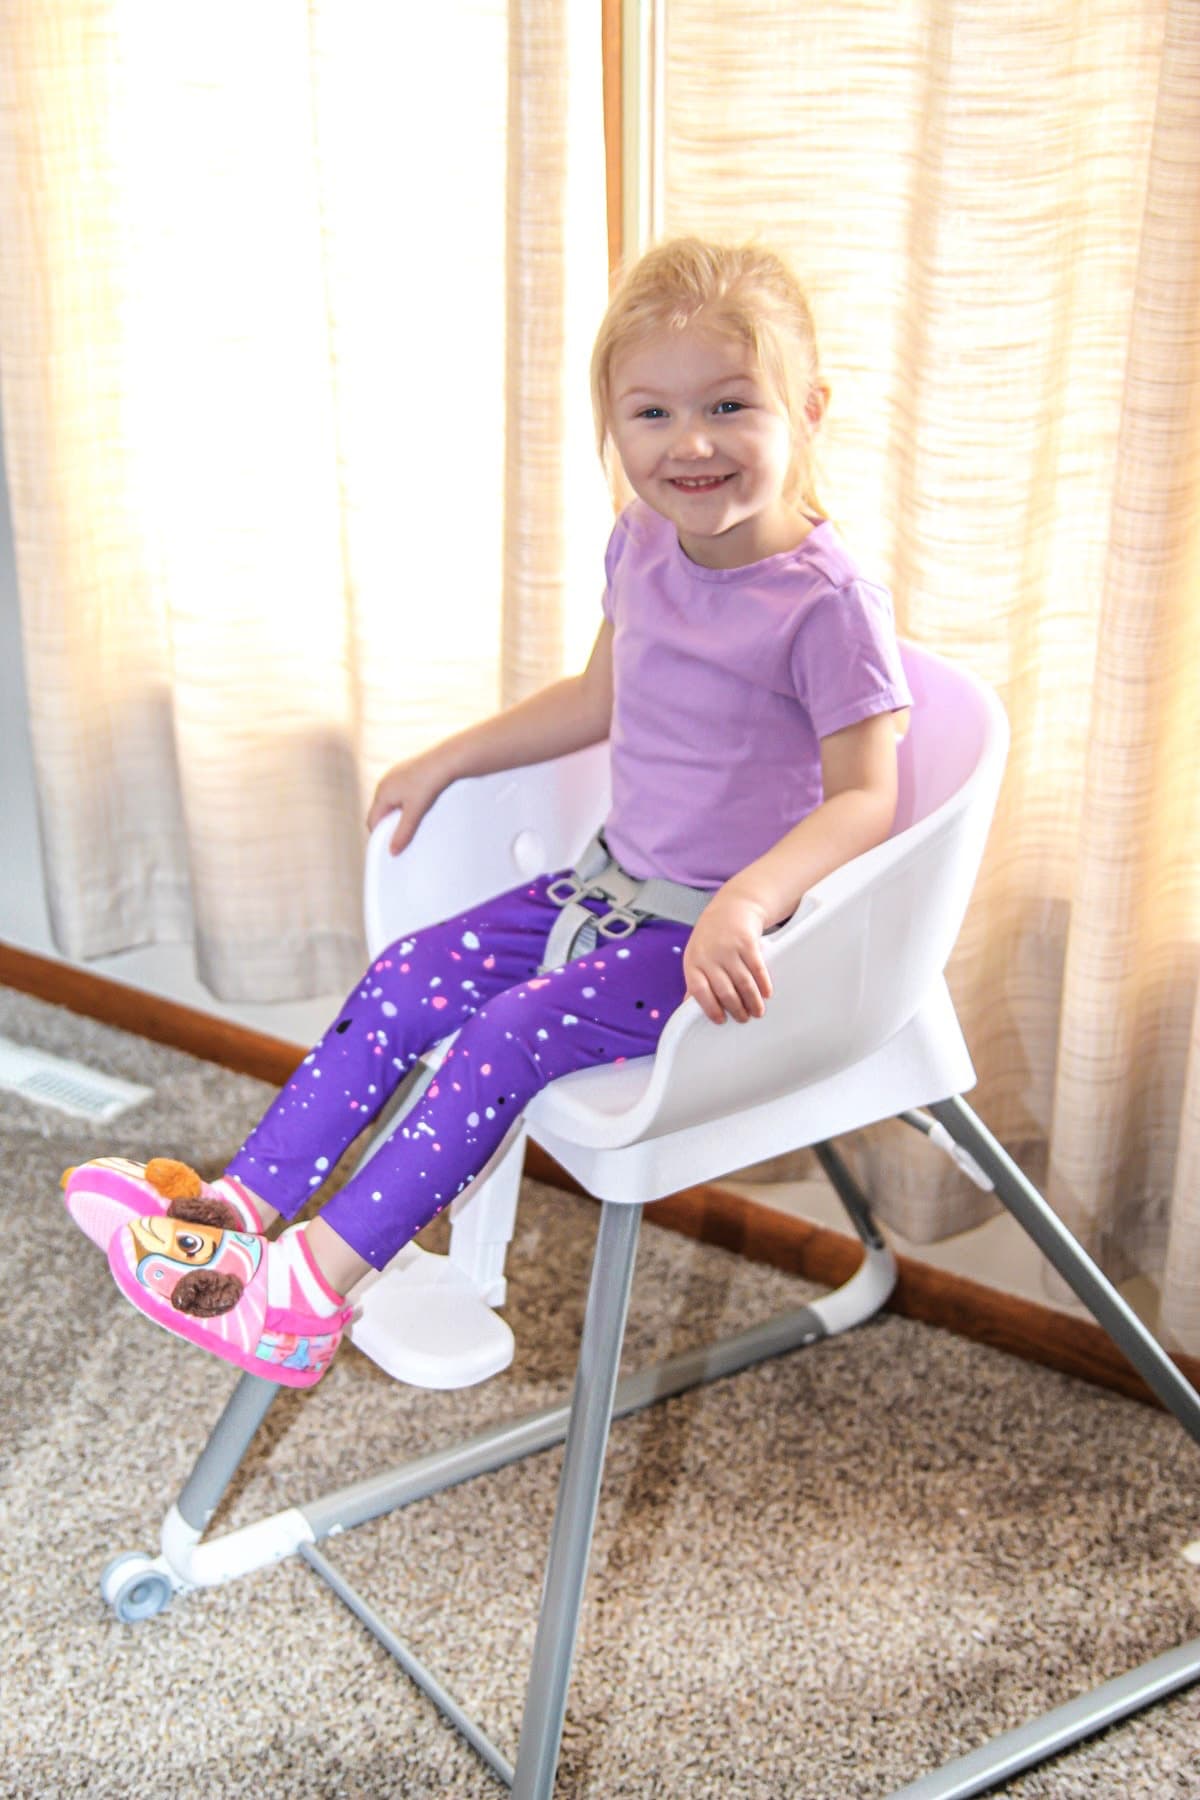 Girl Posing With High Chair-Ingenuity Beanstalk 6-in-1 High Chair